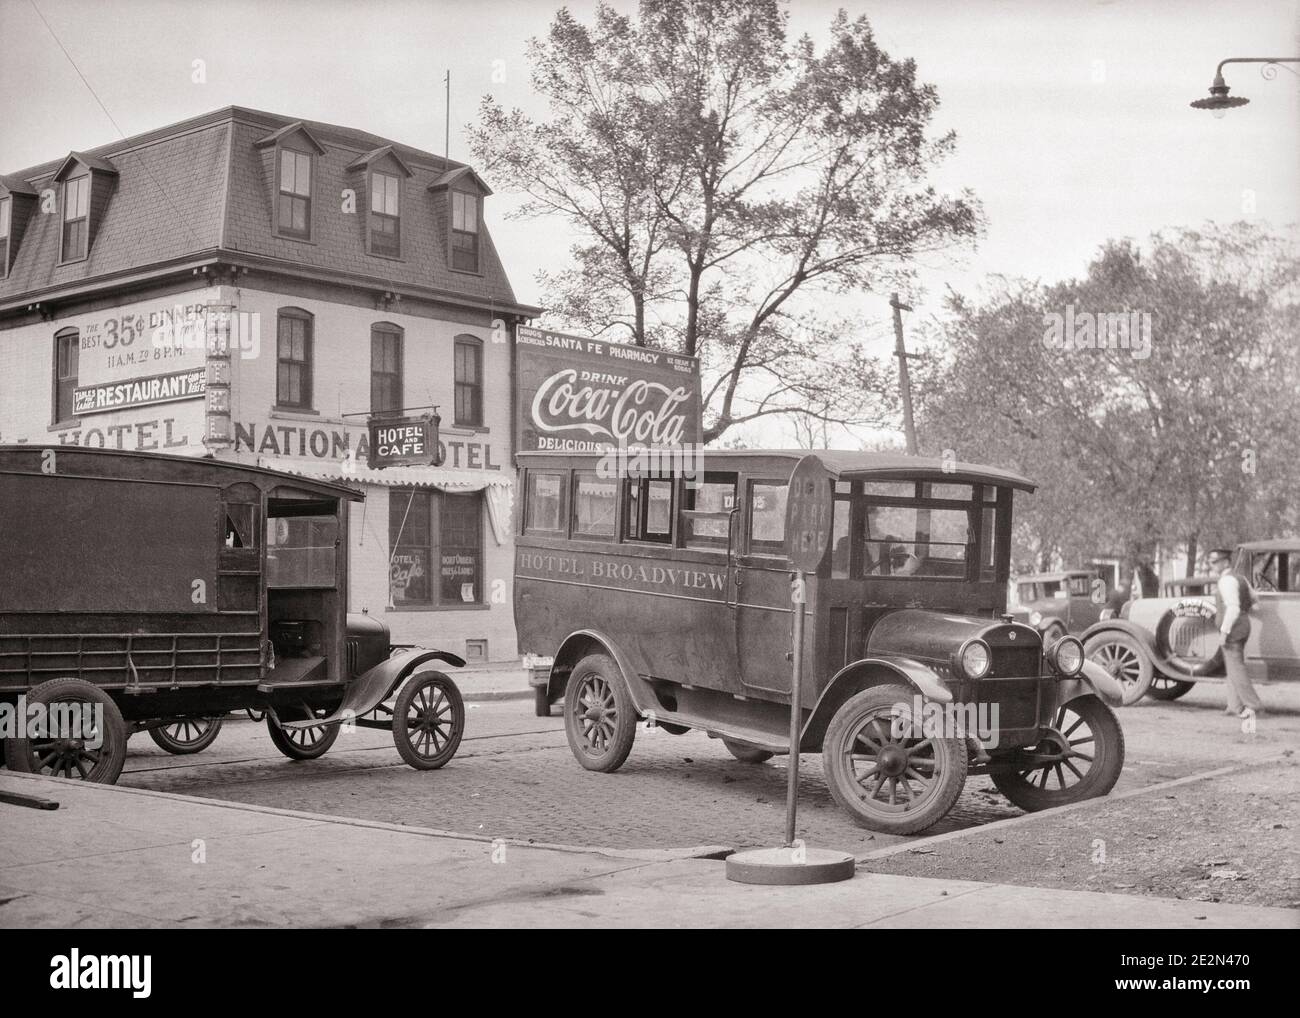 1920s MOTOR BUS AND DELIVERY VAN TRUCK PARKED WAITING AT RAILWAY RAILROAD STATION FOR PASSENGERS AND FREIGHT EMPORIA KANSAS USA  - q45713 CPC001 HARS BUILDINGS TRANSPORTATION B&W FREIGHT PARKED NORTH AMERICA NORTH AMERICAN STRUCTURE PROPERTY KS CUSTOMER SERVICE MOTOR VEHICLE AND EXTERIOR AT COCA-COLA REAL ESTATE STRUCTURES MANSARD ROOF EDIFICE EMPORIA BUSES TRANSIT BLACK AND WHITE MIDWEST MOTOR VEHICLES OLD FASHIONED Stock Photo